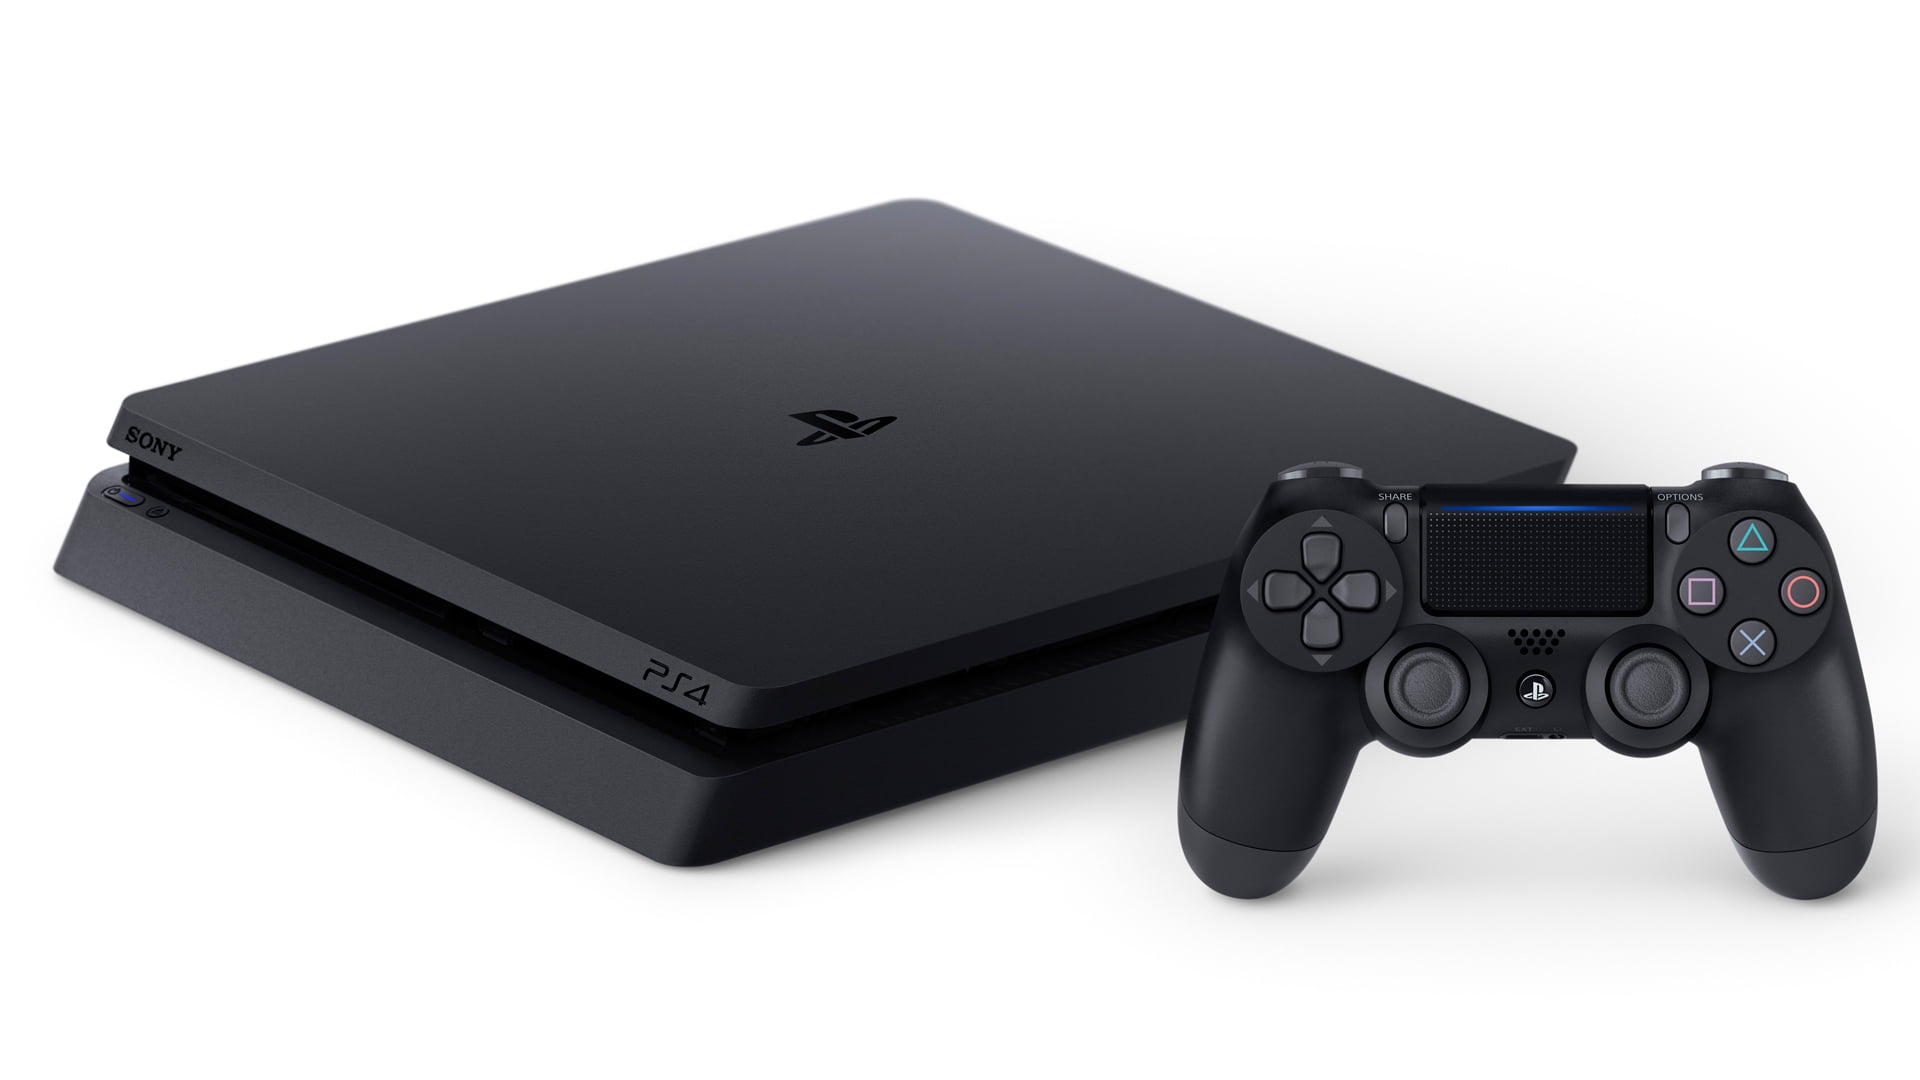 Sony PlayStation 4 Slim PS4 Console with Matching Controller (Refurbished) - Walmart.com